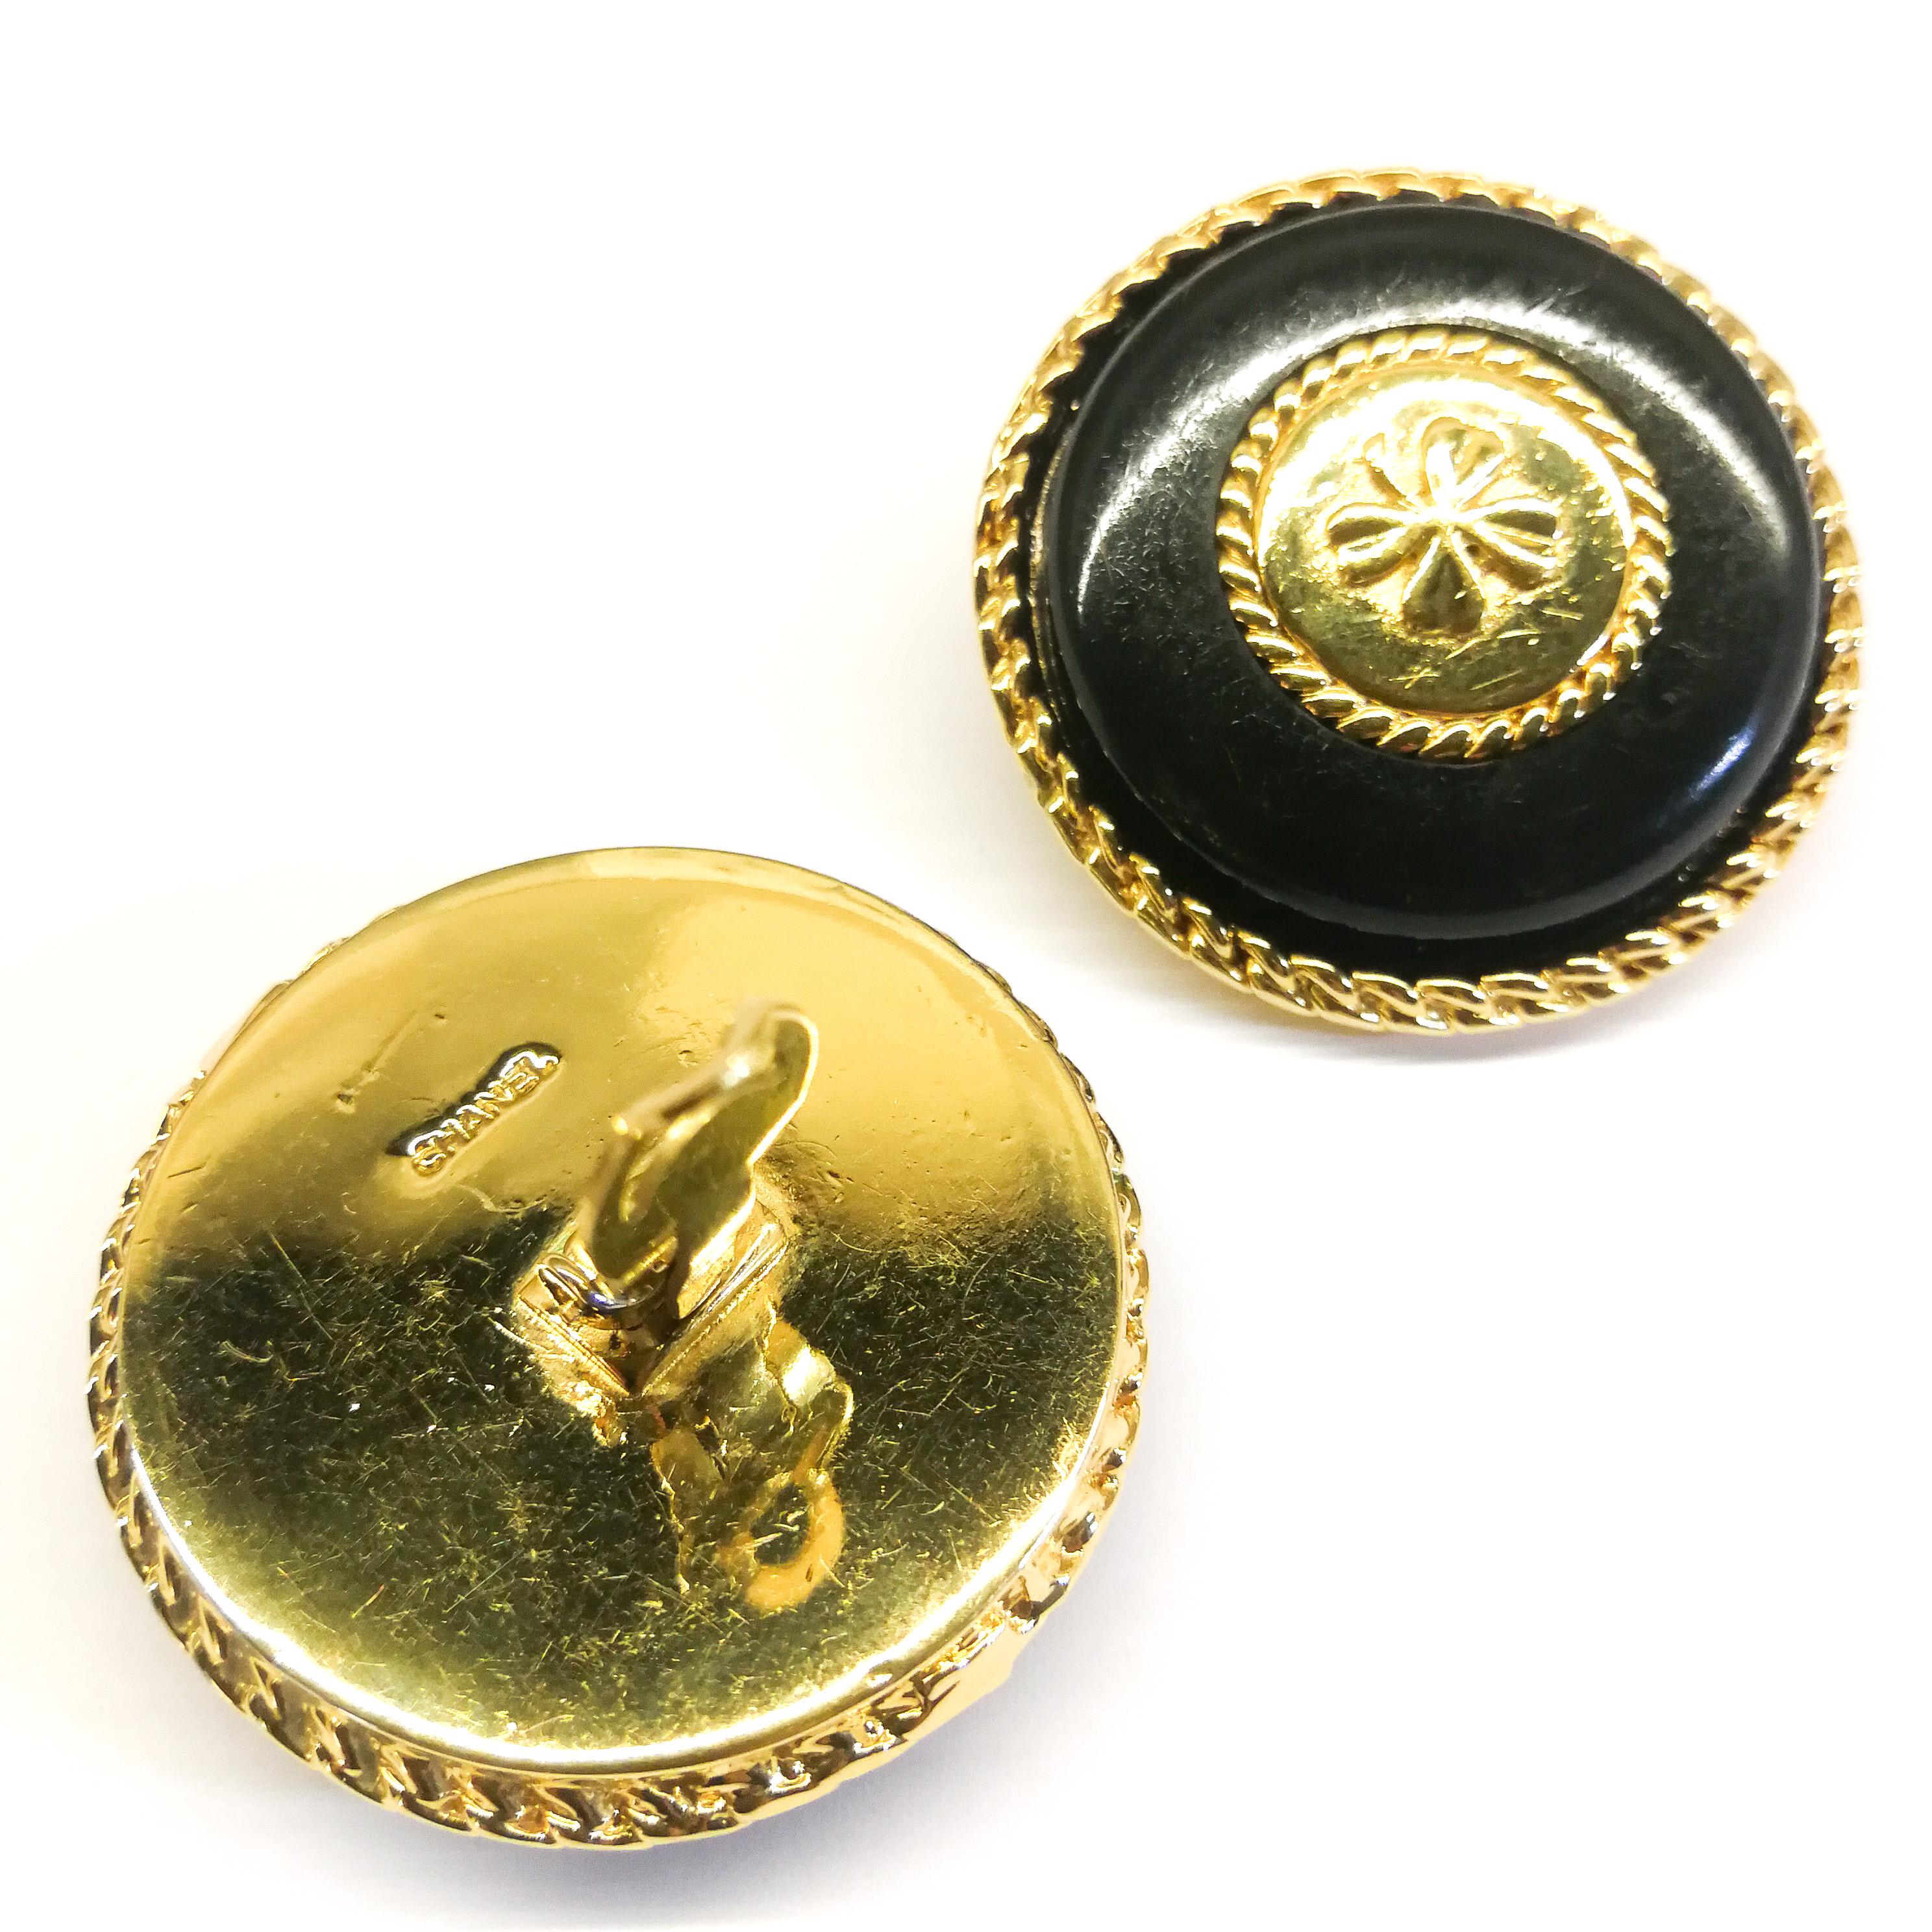 Classic and very smart , these black and gilt earrings bear the iconic motif of the lucky four leaf clover, one of Coco Chanel's personal talismans (the lion's head, Leo, the double C being others). With plaited gilt 'braid' as edging, reminiscent